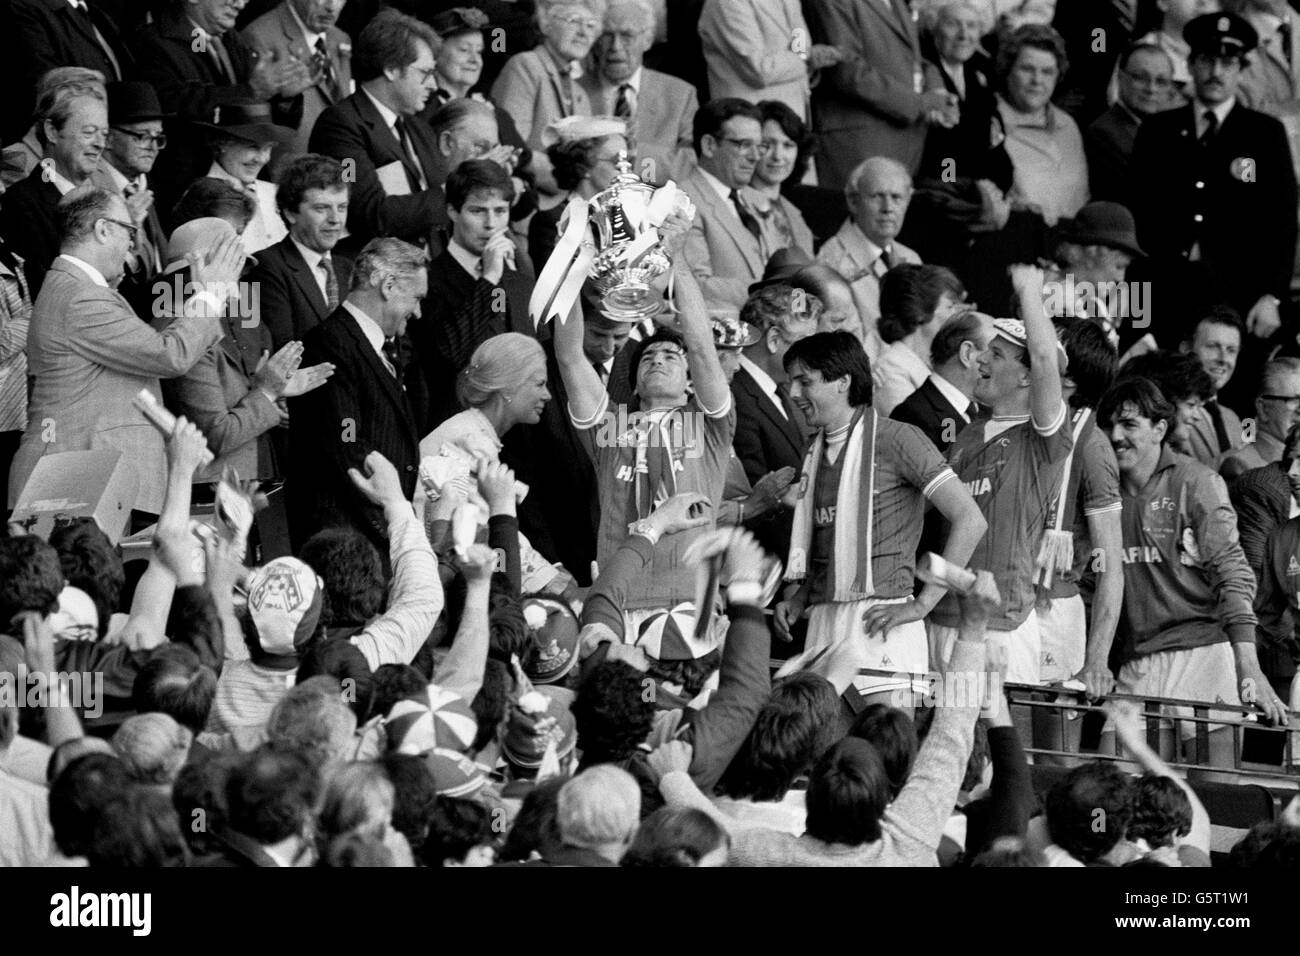 Kevin Ratcliffe, at 23 the youngest FA Cup winning captain for 20 years, holds the trophy aloft after Everton's 2-0 victory over Watford. The Duchess of Kent, who presented the Trophy is left and goalscorers Graeme Sharp and Andy Gray (with hat) are behind their skipper. Stock Photo